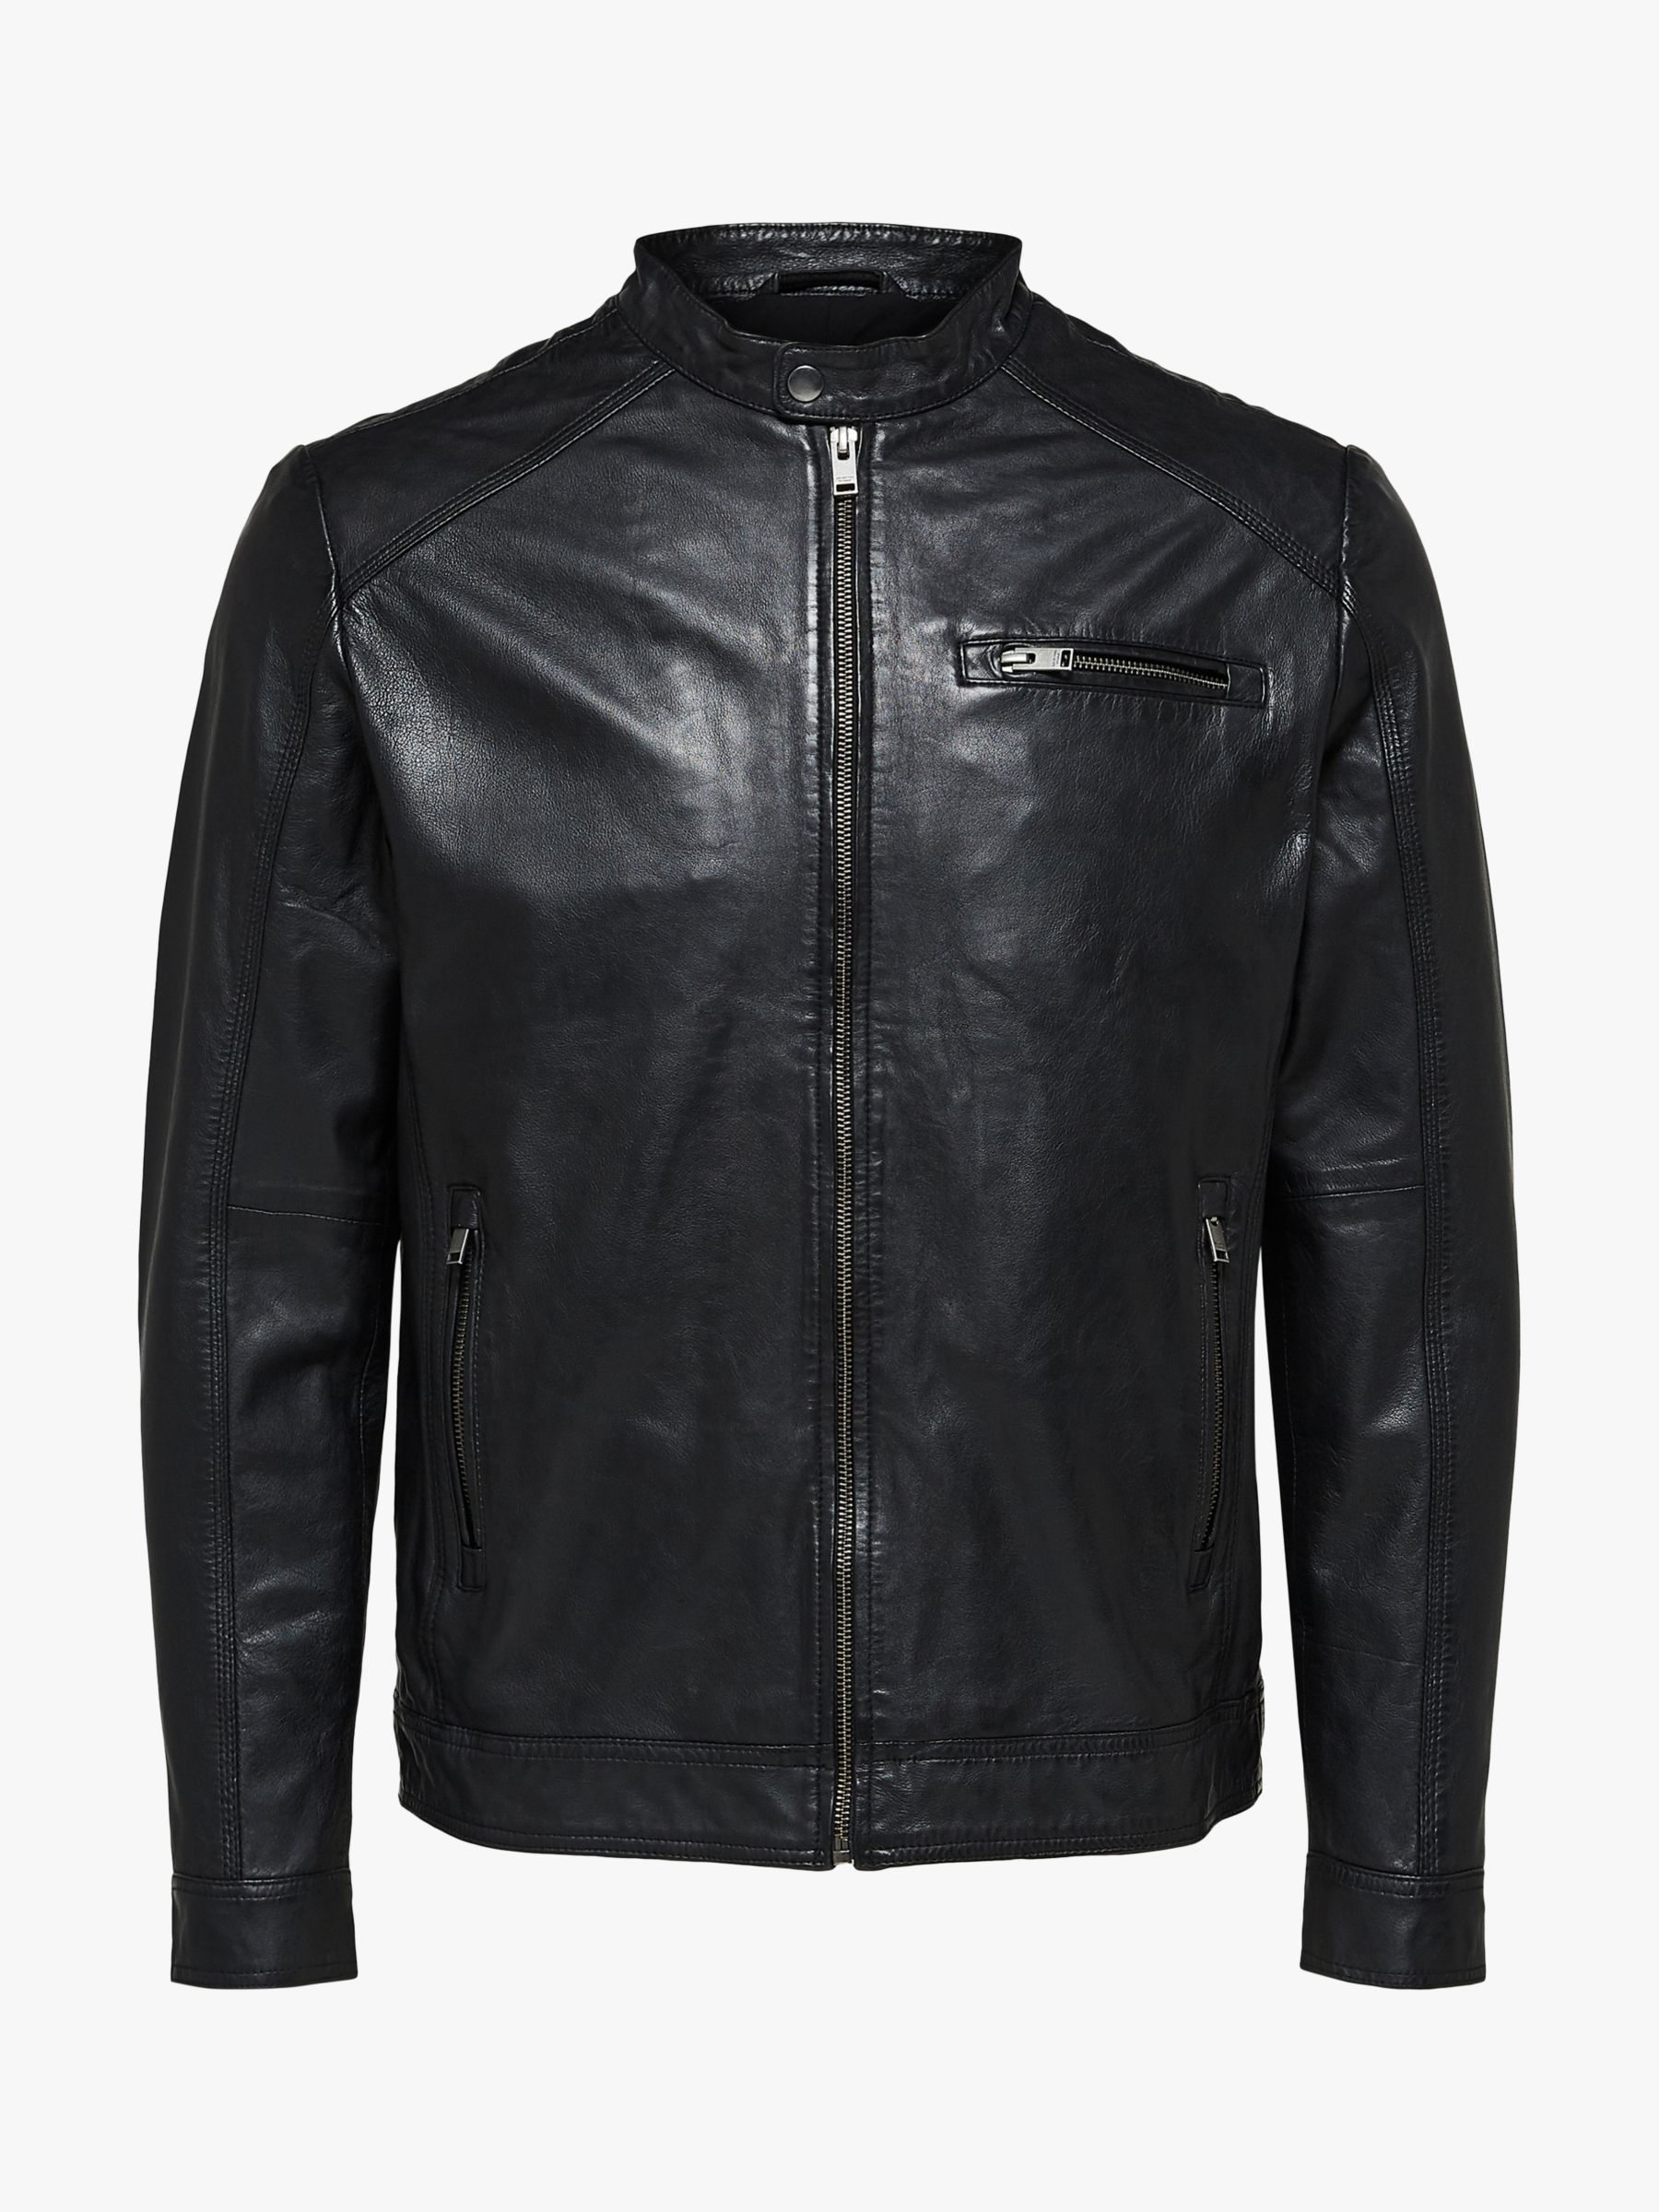 SELECTED HOMME Classic Leather Jacket, Black